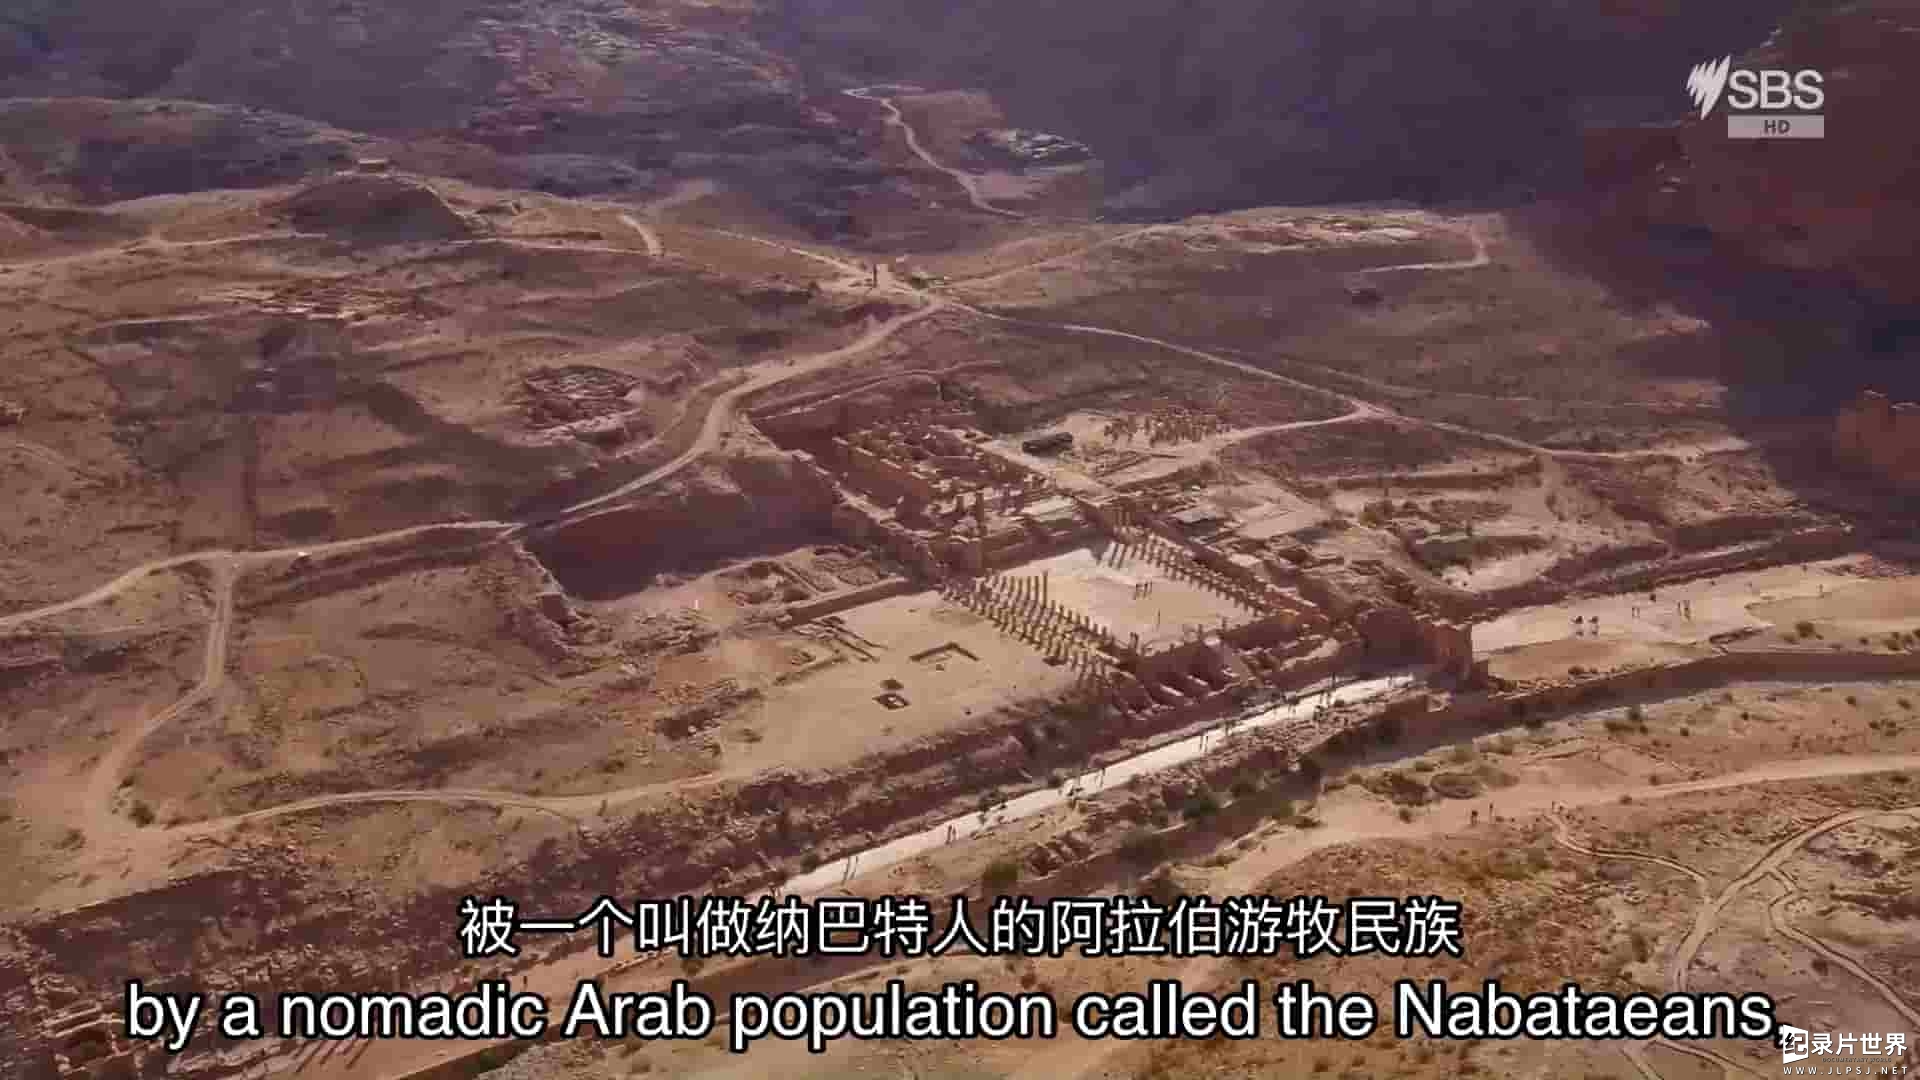 SBS纪录片《古代超级建筑 Ancient Superstructures 2020》第1季全4集